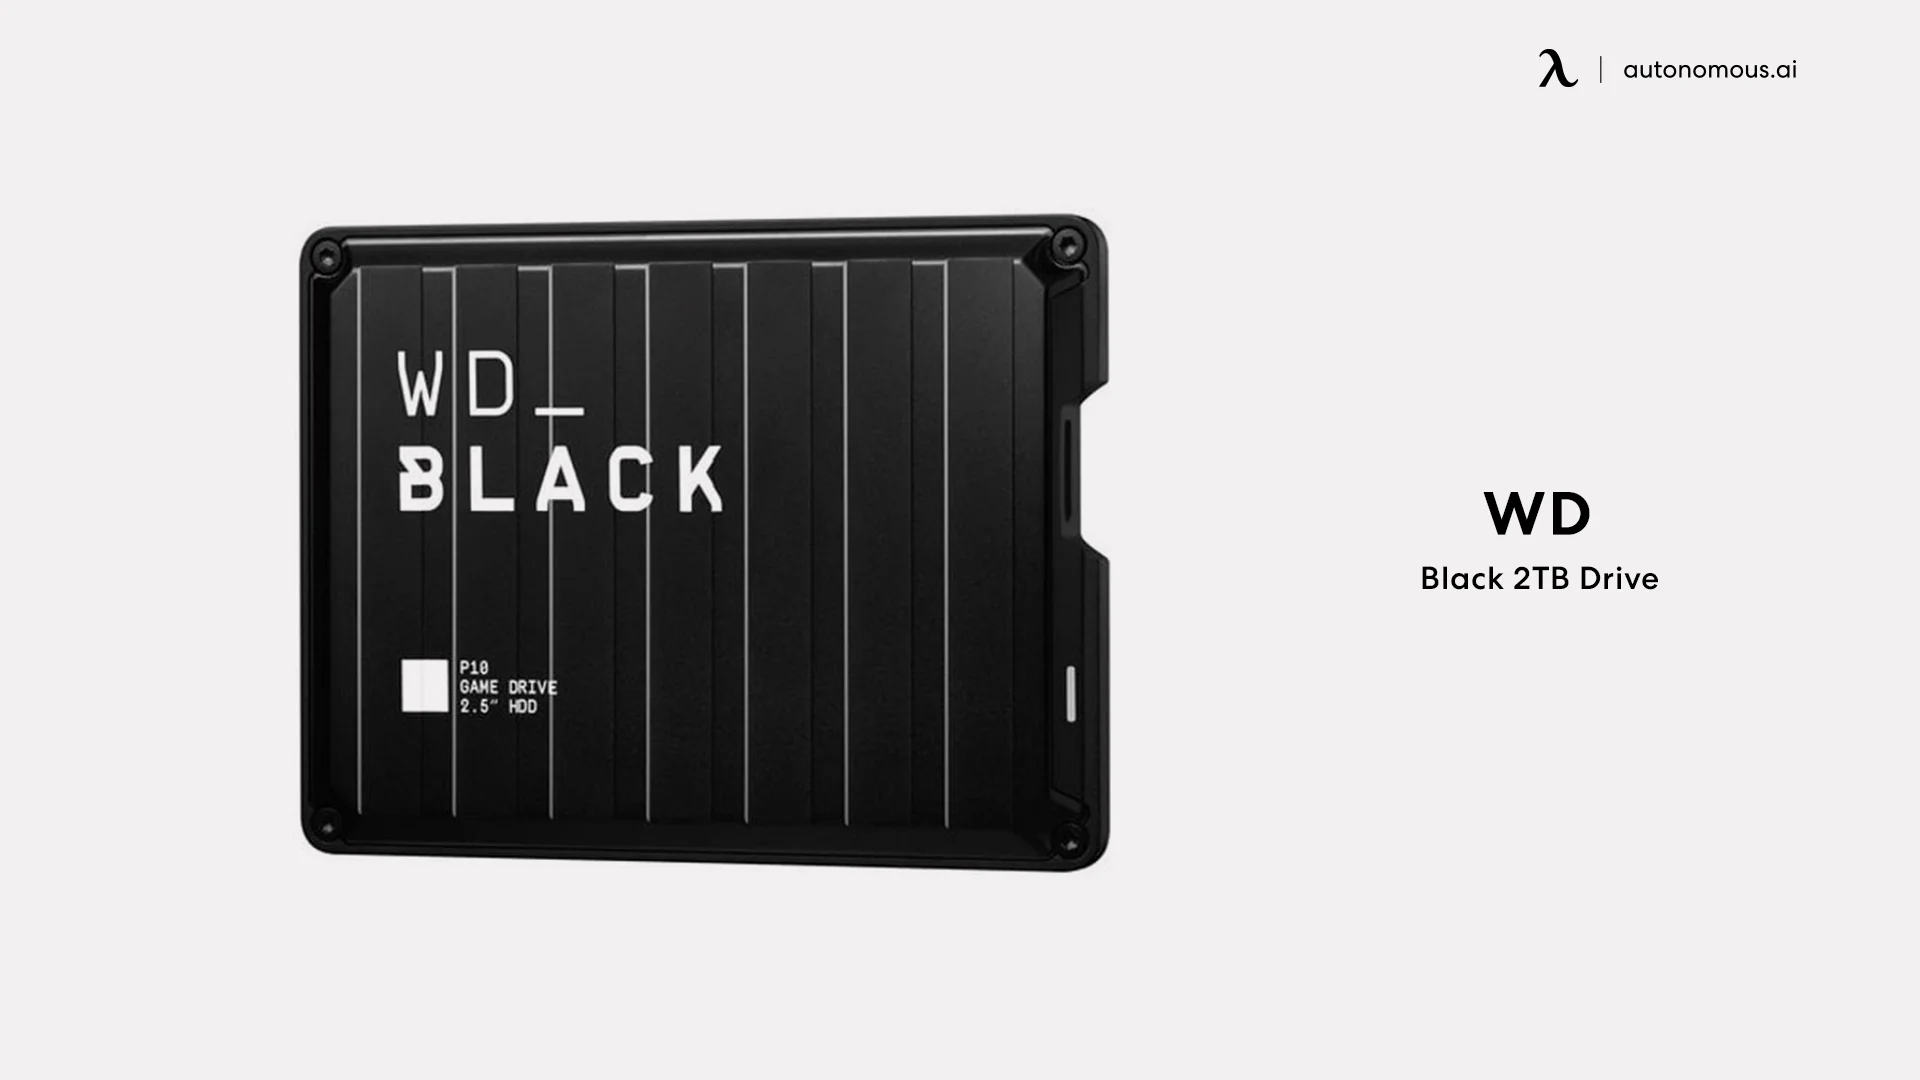 WD Black 2TB Drive - gaming computer accessories